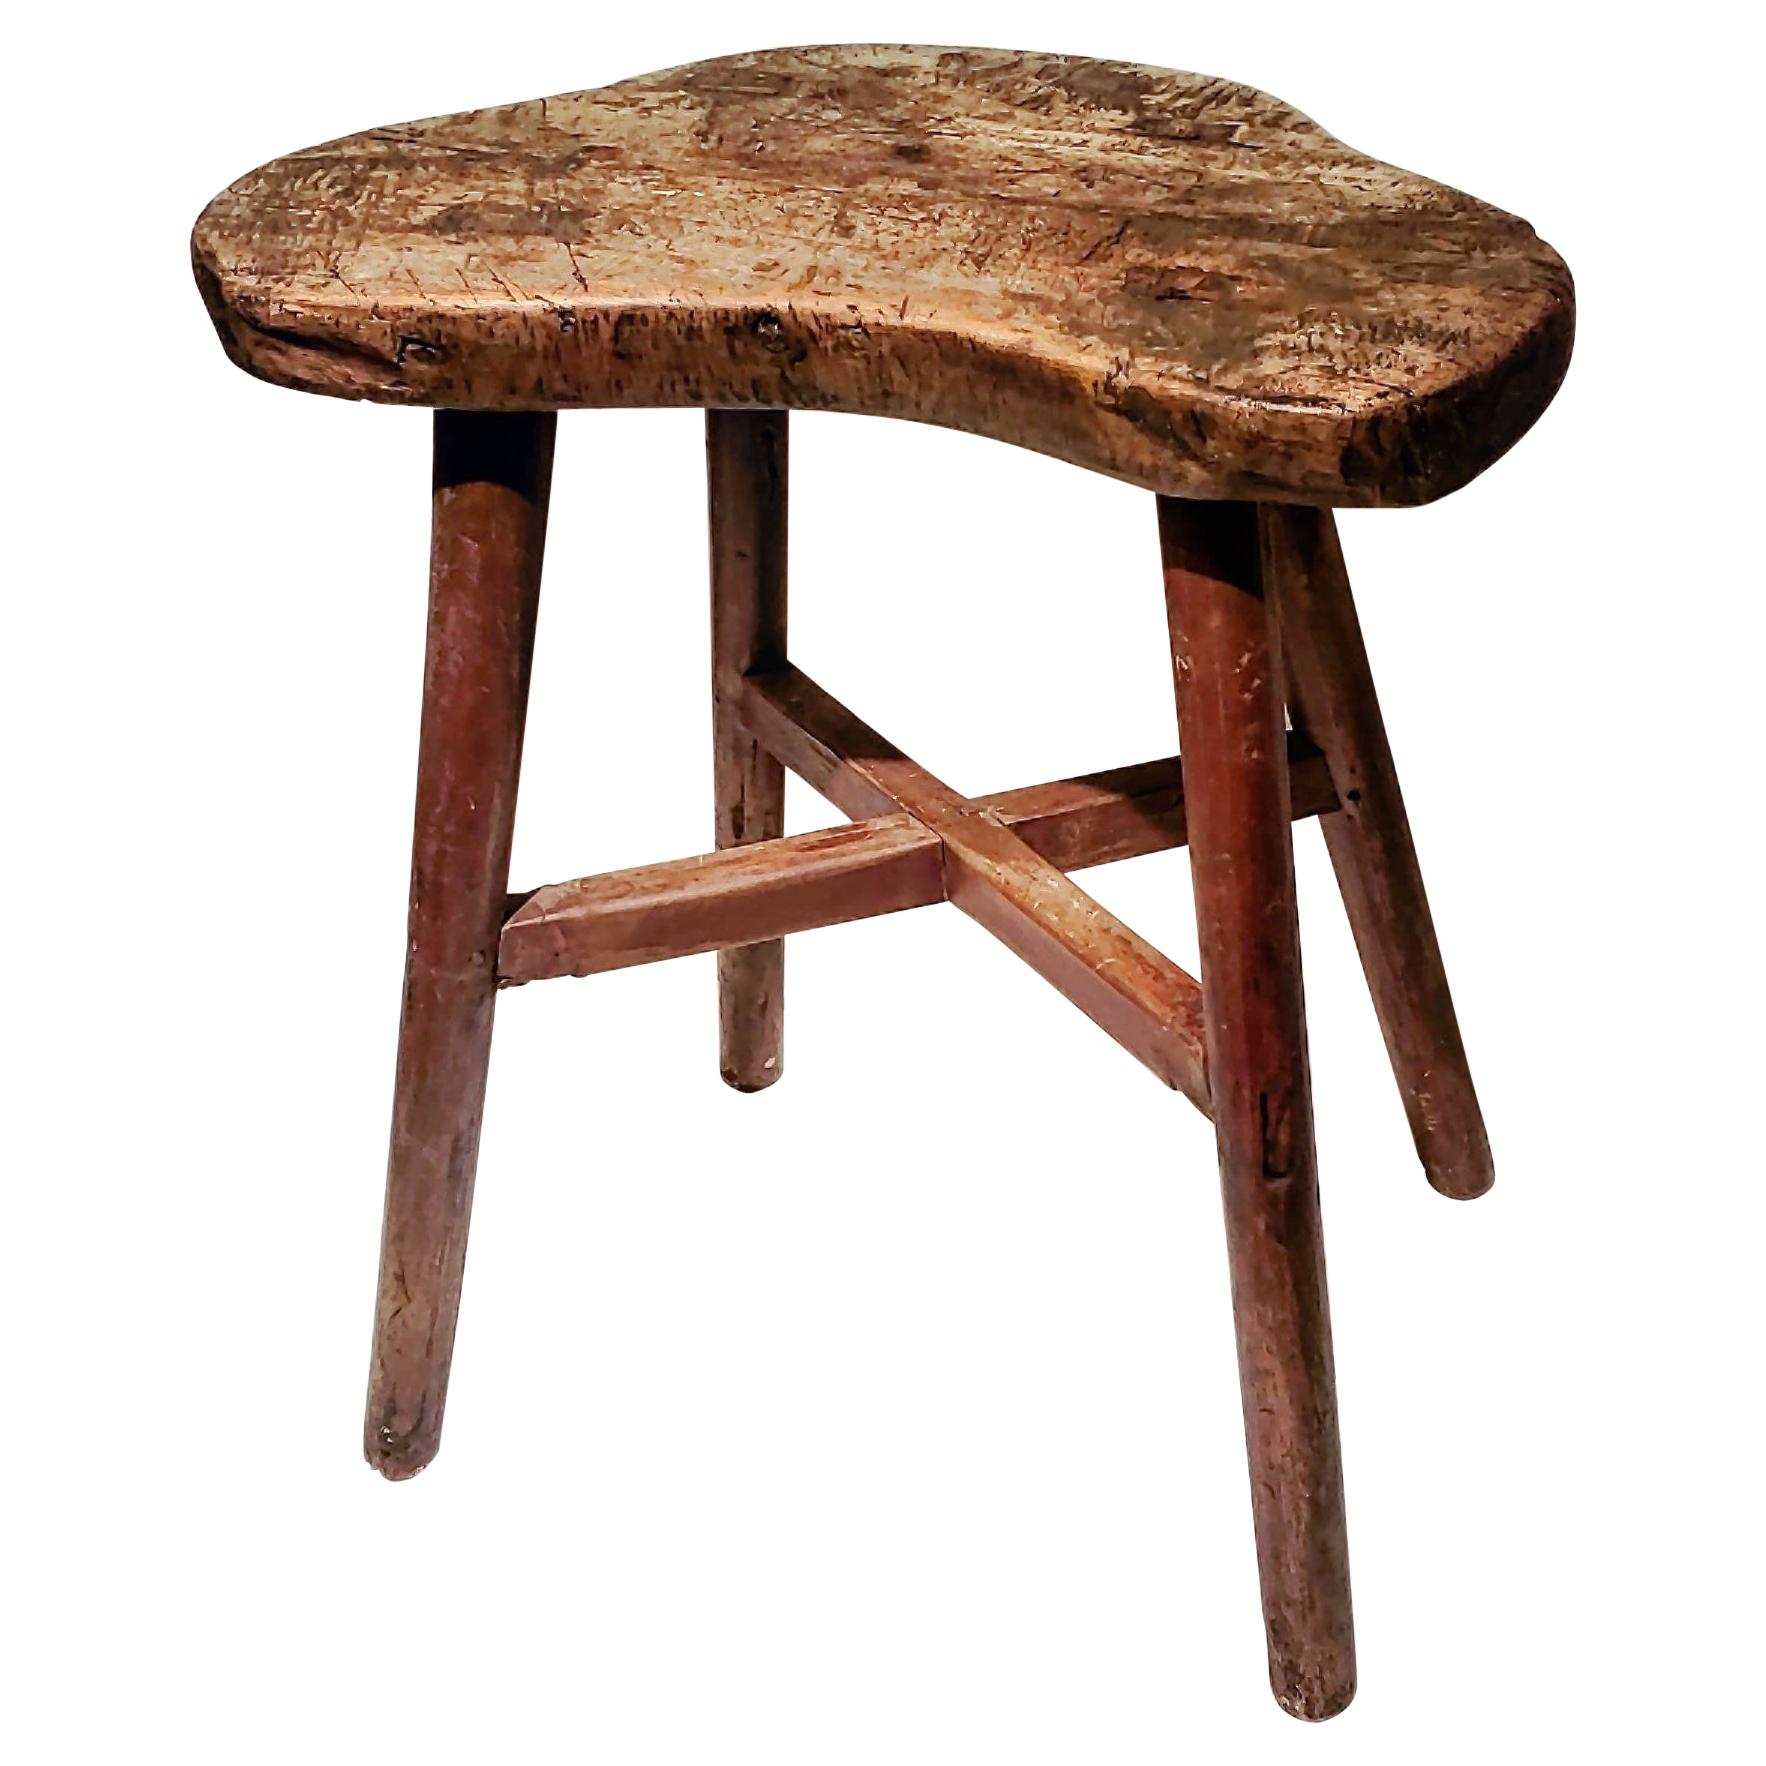 Early 19th Century American Stool in Old Red Wash